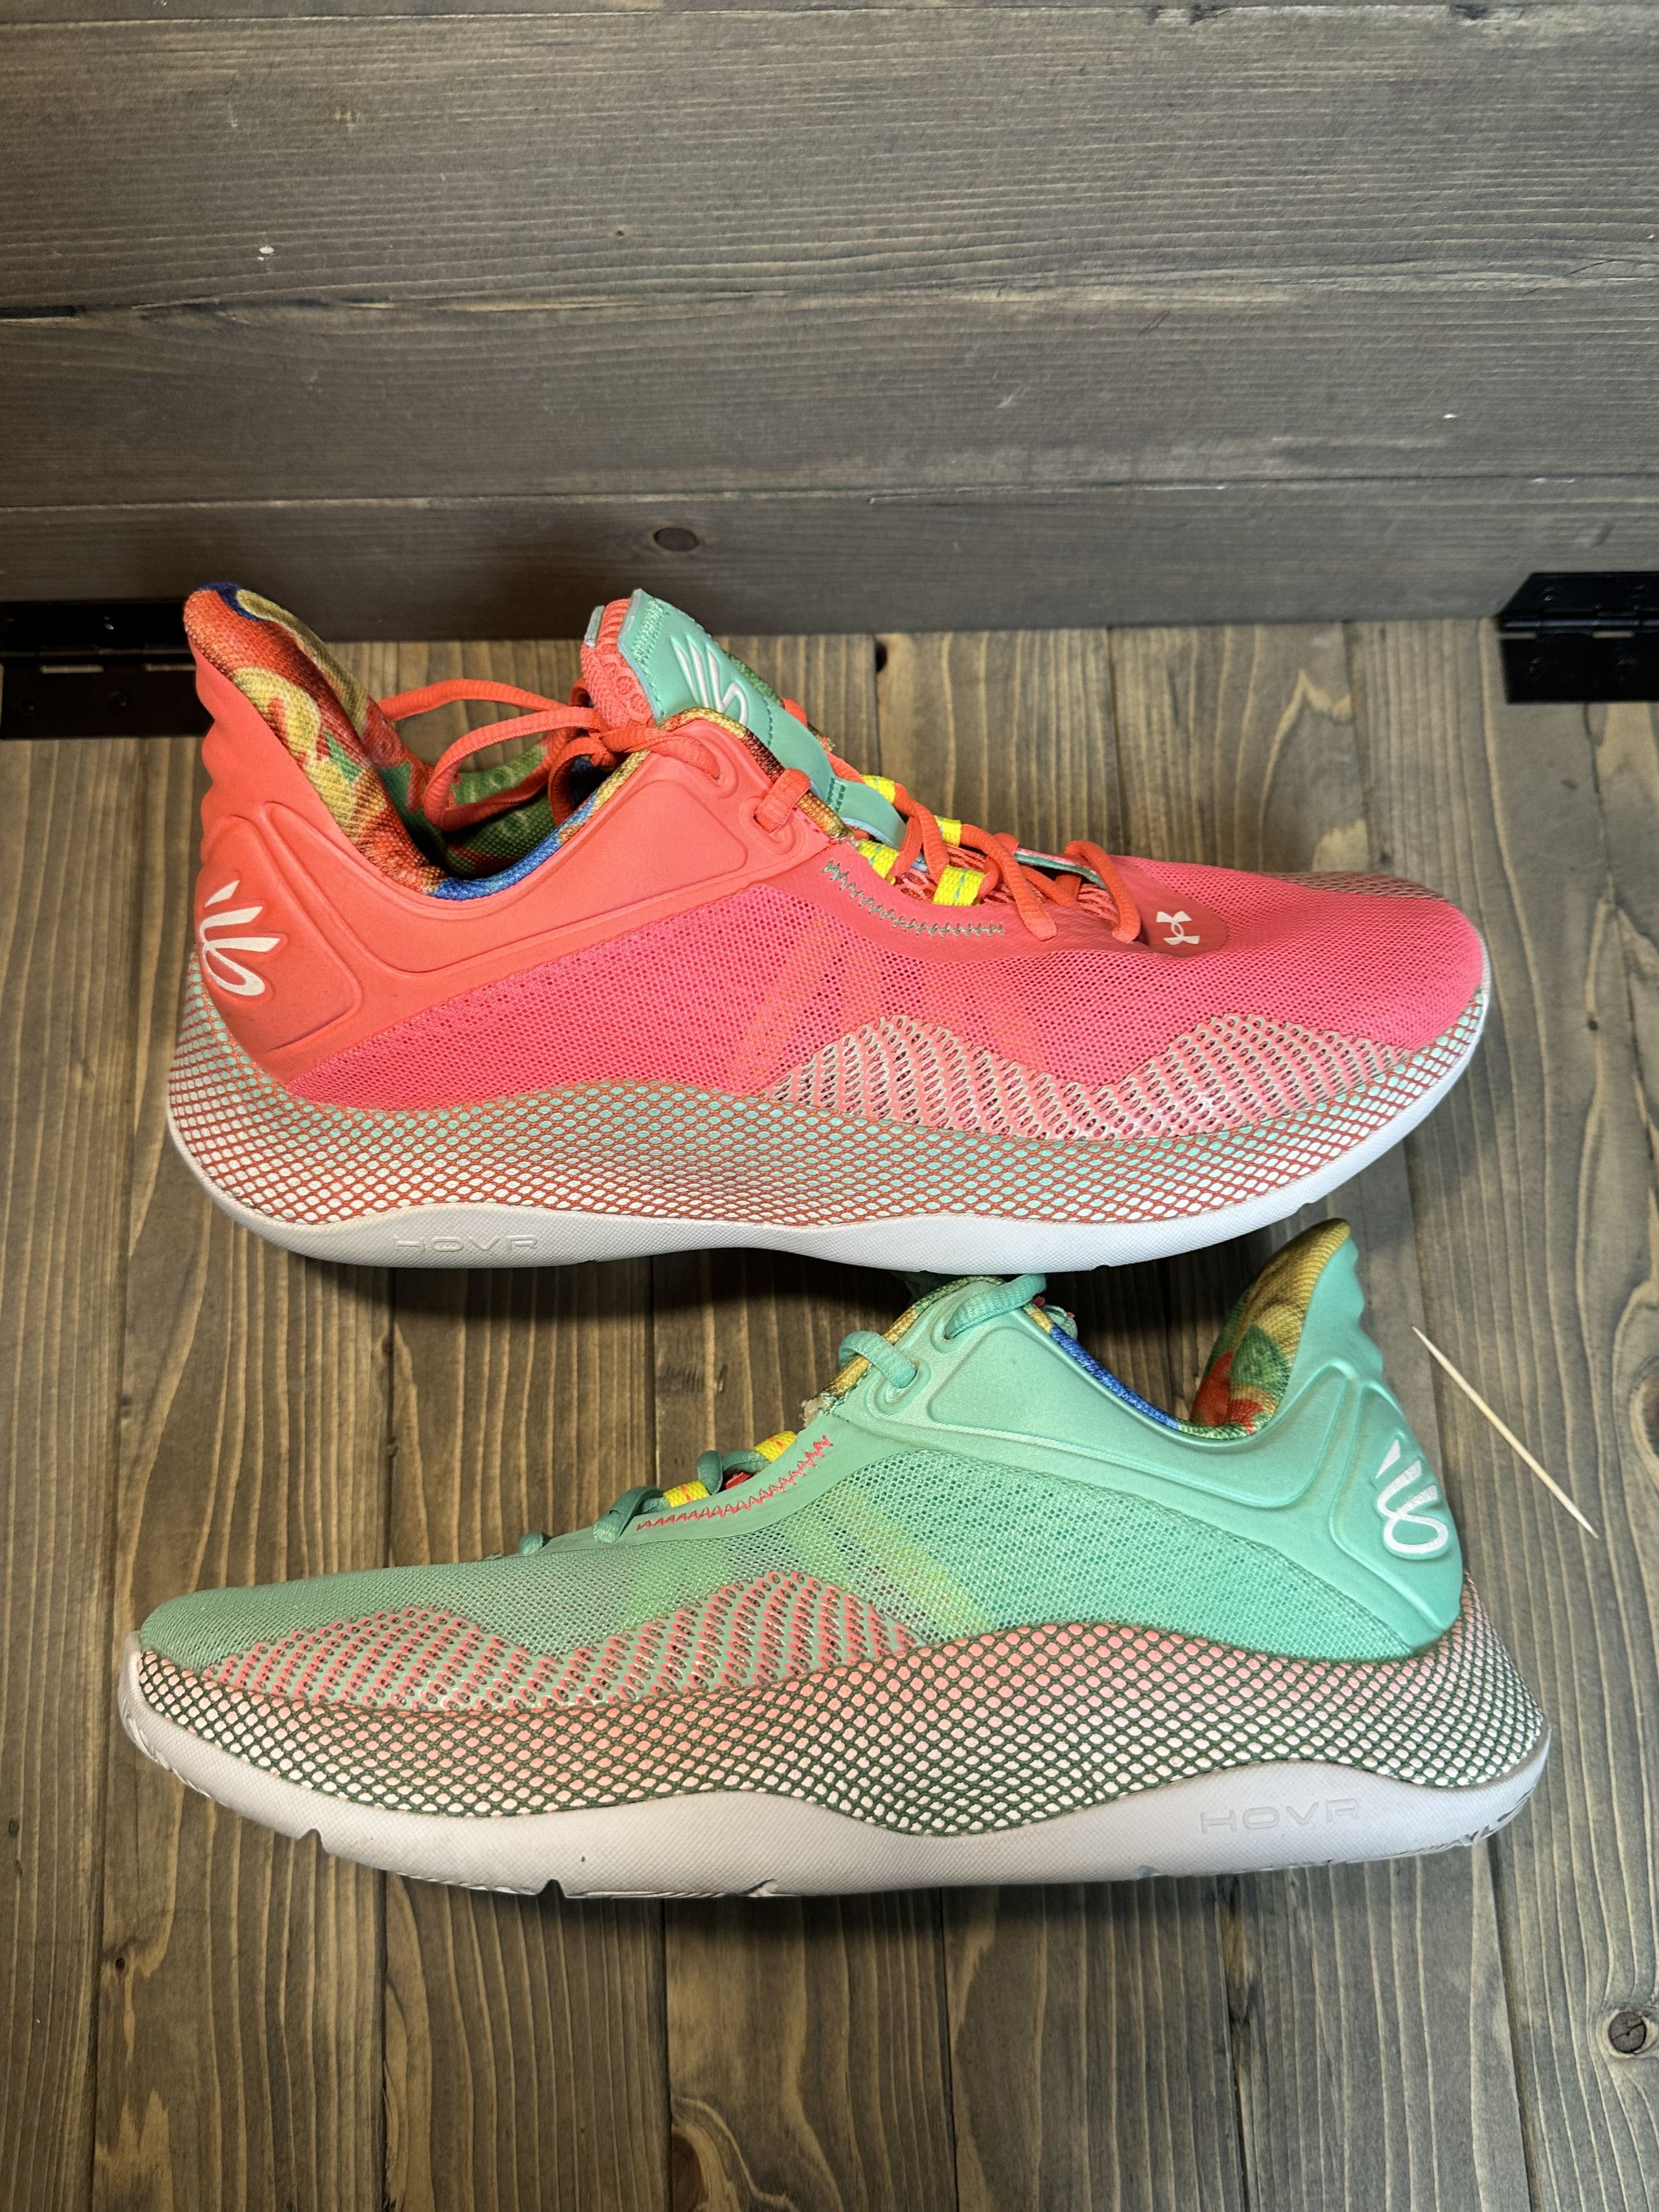 Under Armour Sour Patch Kids x Curry HOVR Splash 2 | Grailed